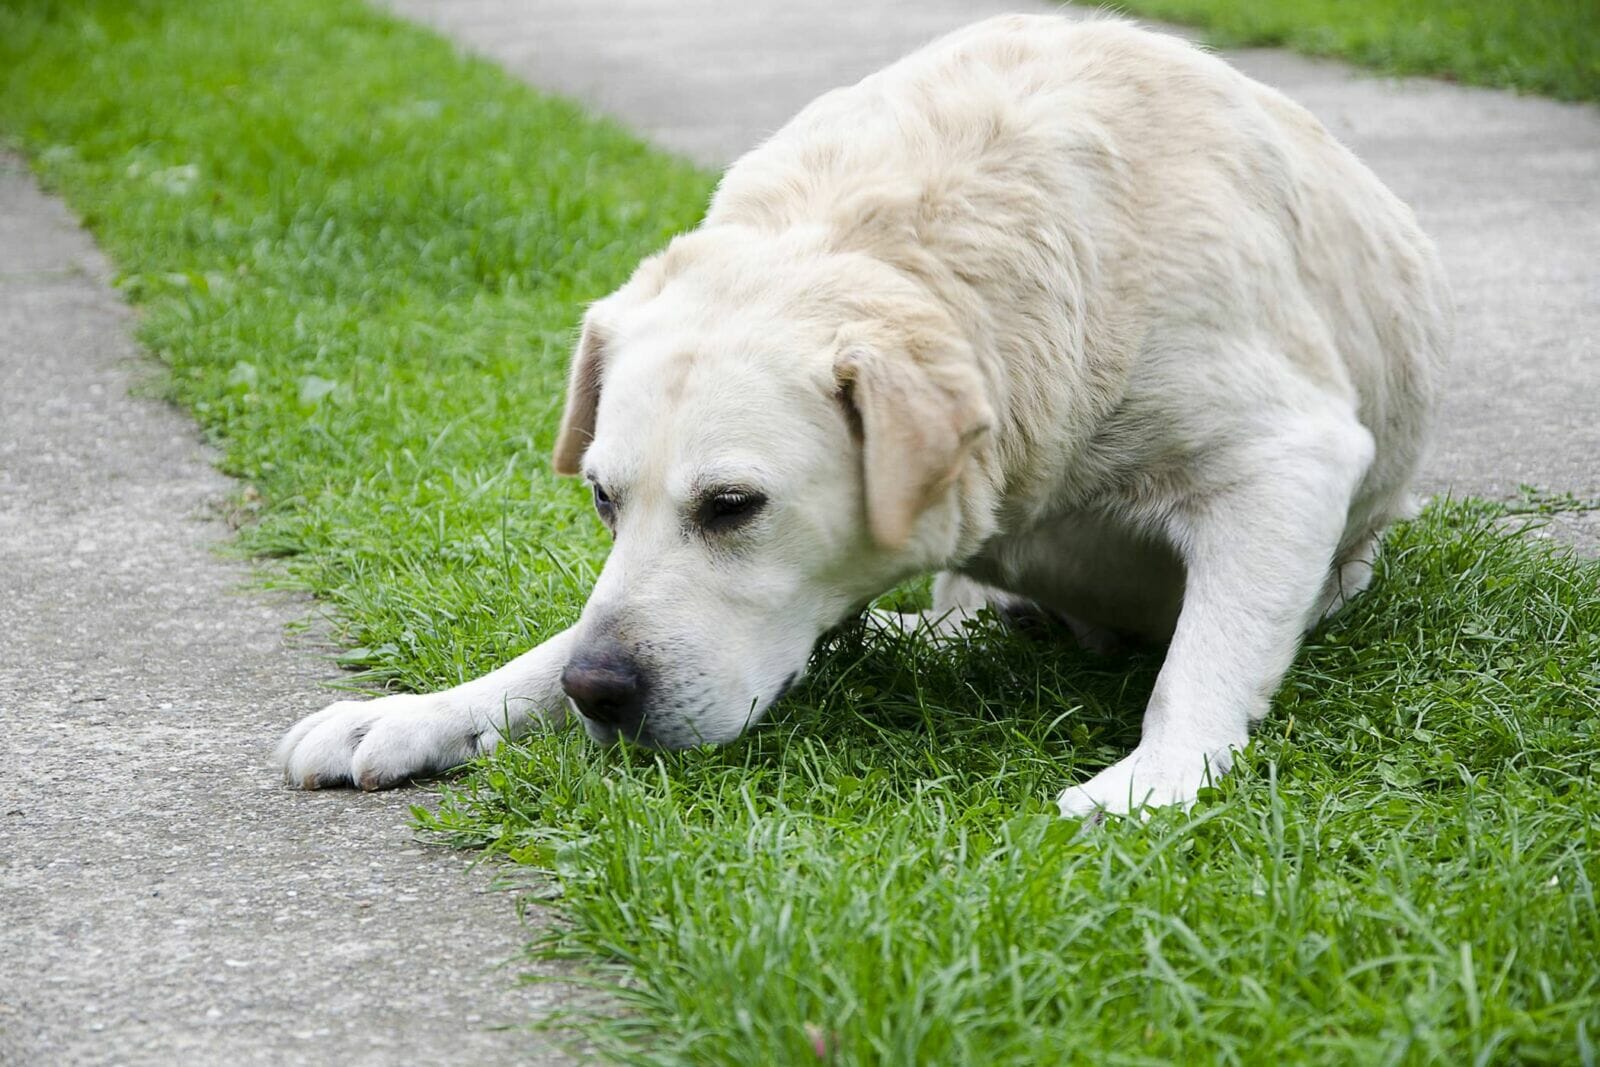 is it ok for dogs to eat their own vomit